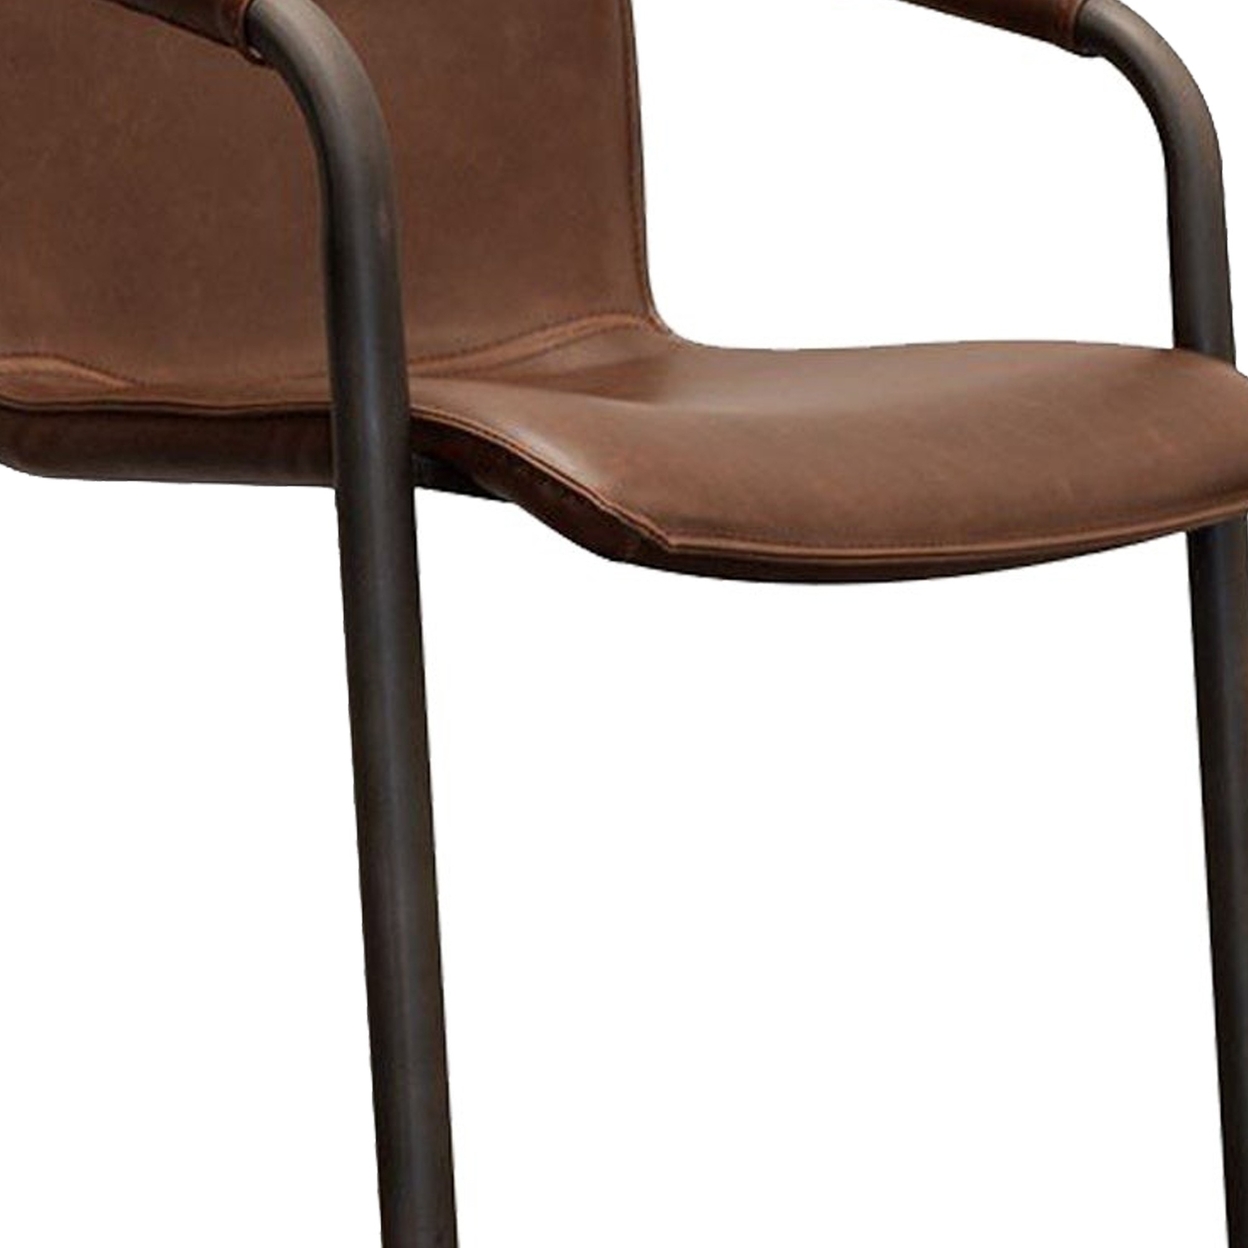 27 Inch Cantilever Counter Stool Chair, Set Of 2, Brown Vegan Faux Leather- Saltoro Sherpi